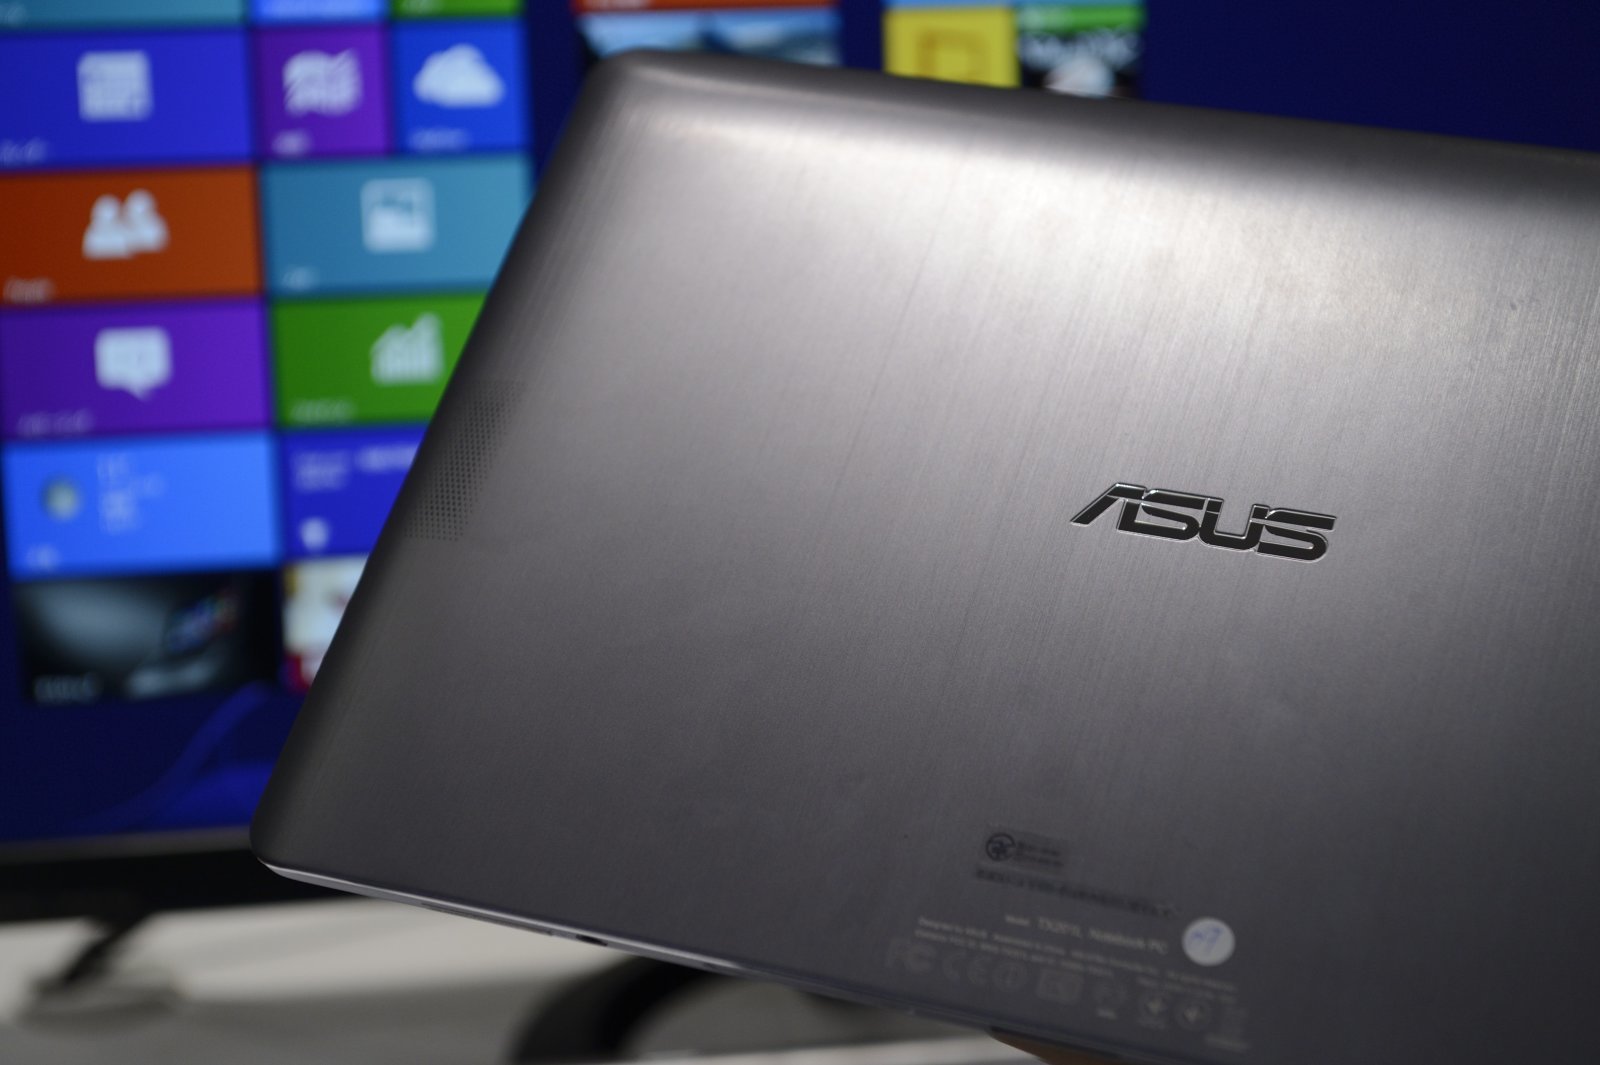 The Asus logo is displayed on the back of an Asus TransBook Trio TX201LA device, manufactured by Asustek Computer Inc., in an arranged photograph during a product unveiling in Tokyo, Japan, on Tuesday, Oct. 29, 2013. Asustek is working in its research and development facility to make a wearable device, Shih said. Photographer: Akio Kon/Bloomberg via Getty Images